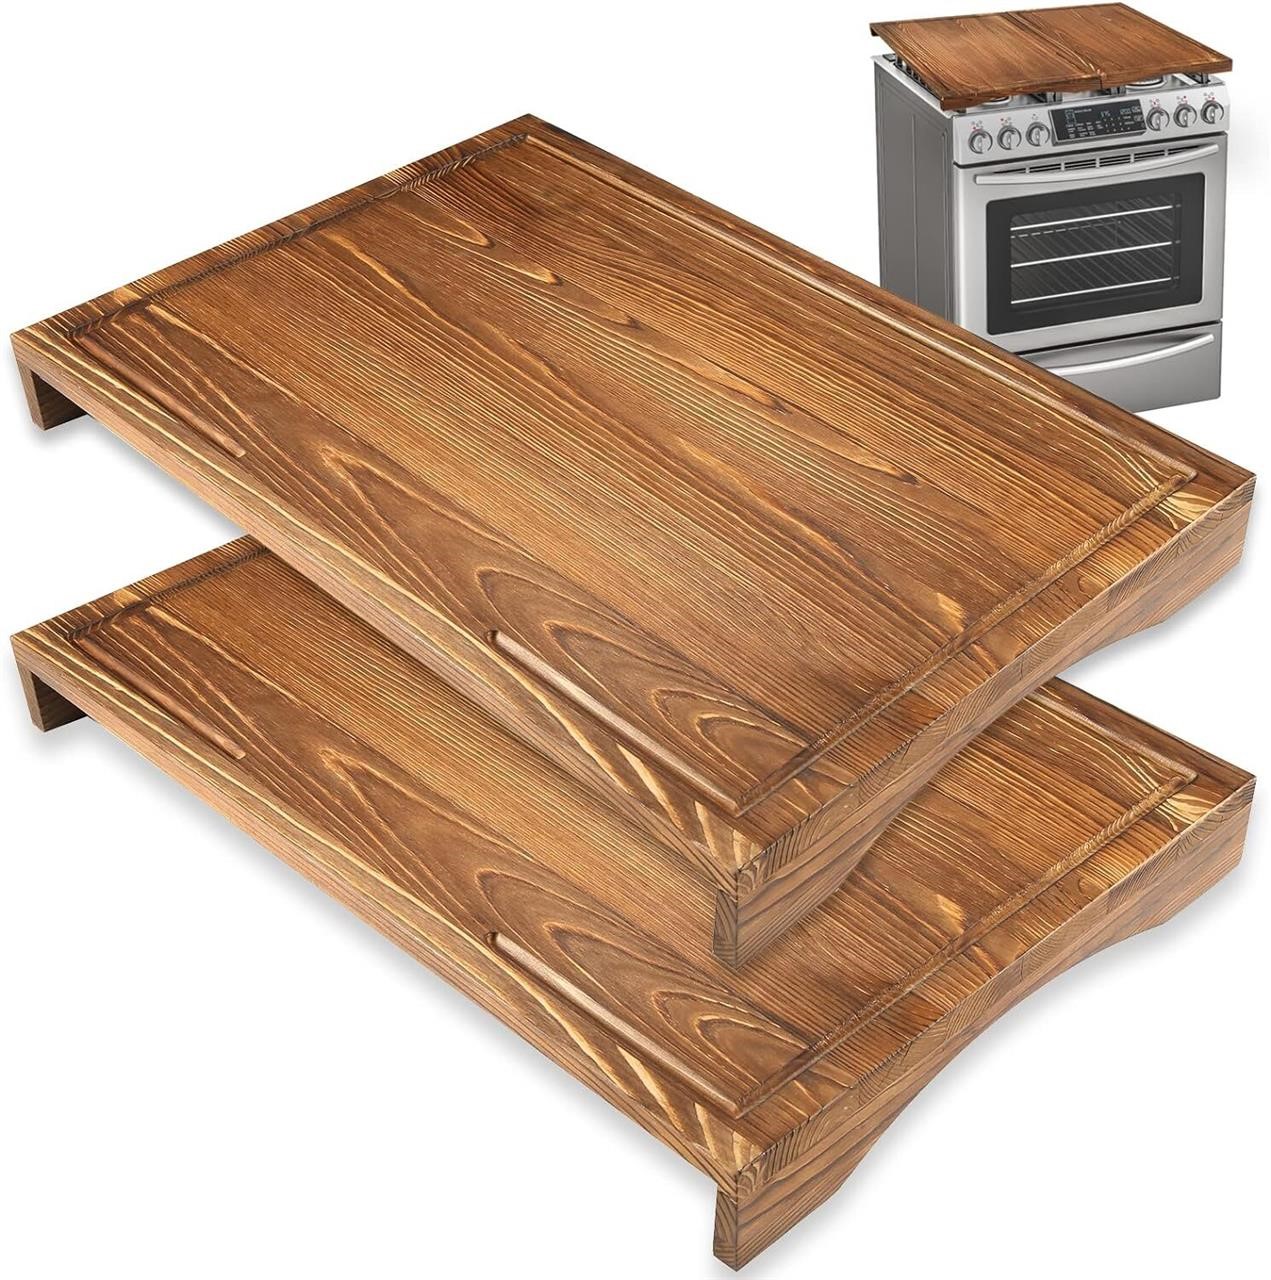 Calmbee Noodle Board Stove Cover - Wooden